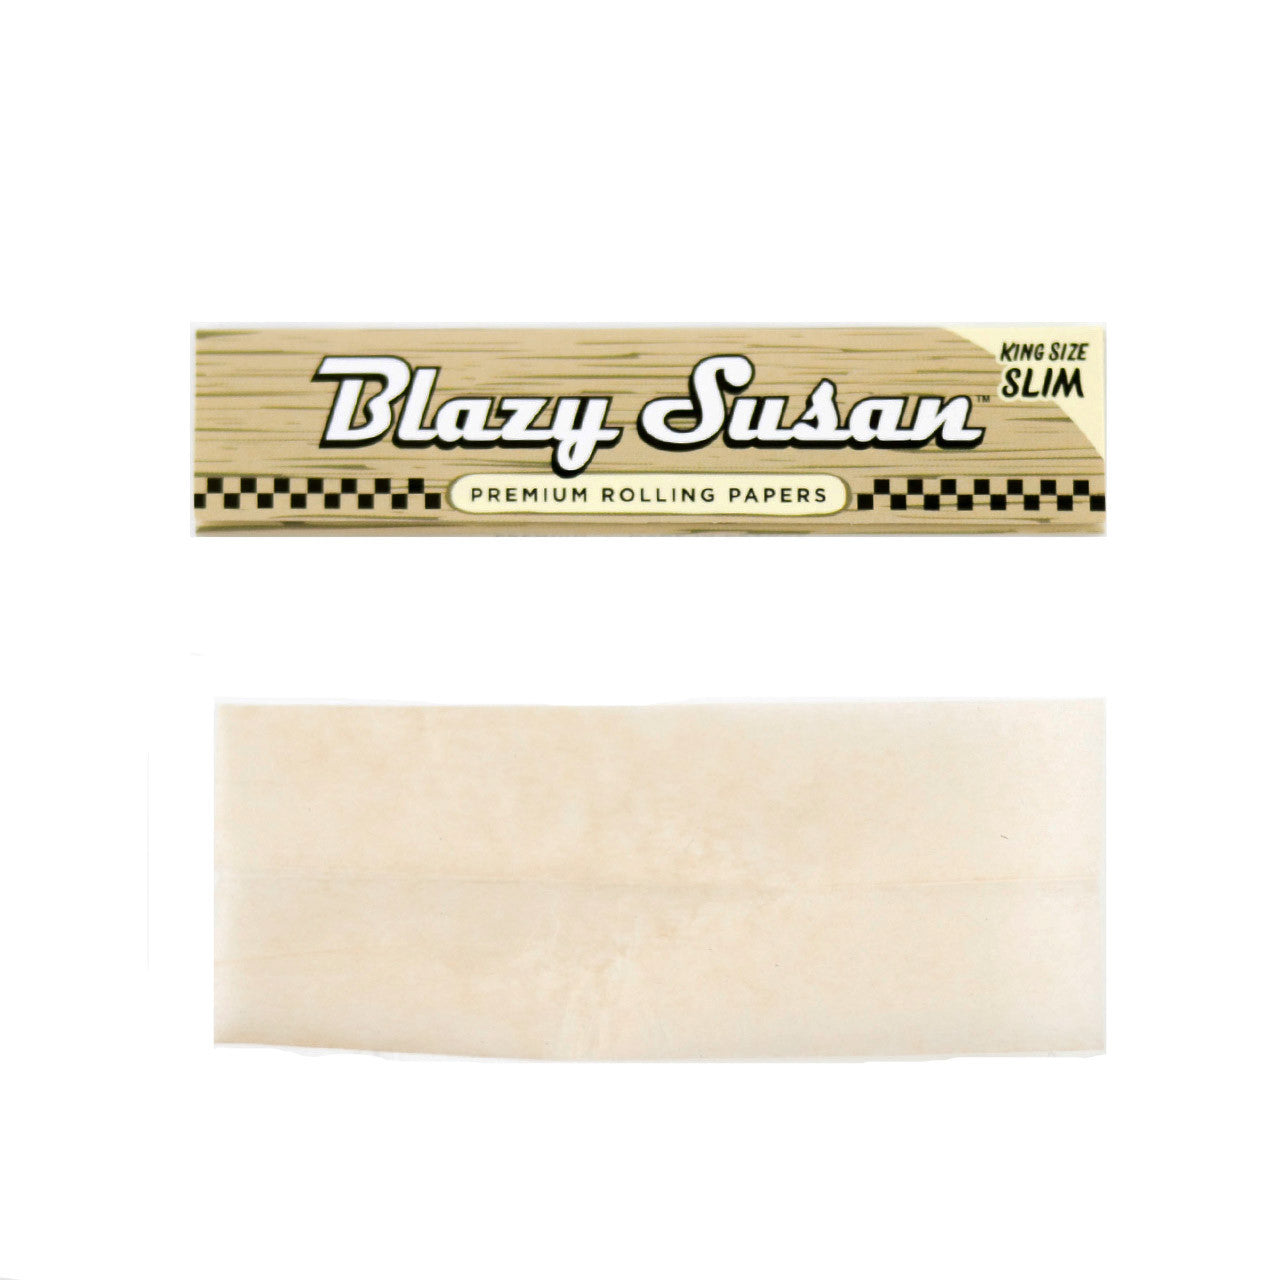 Blazy Susan Unbleached King Size Slim Rolling Papers (50ct)